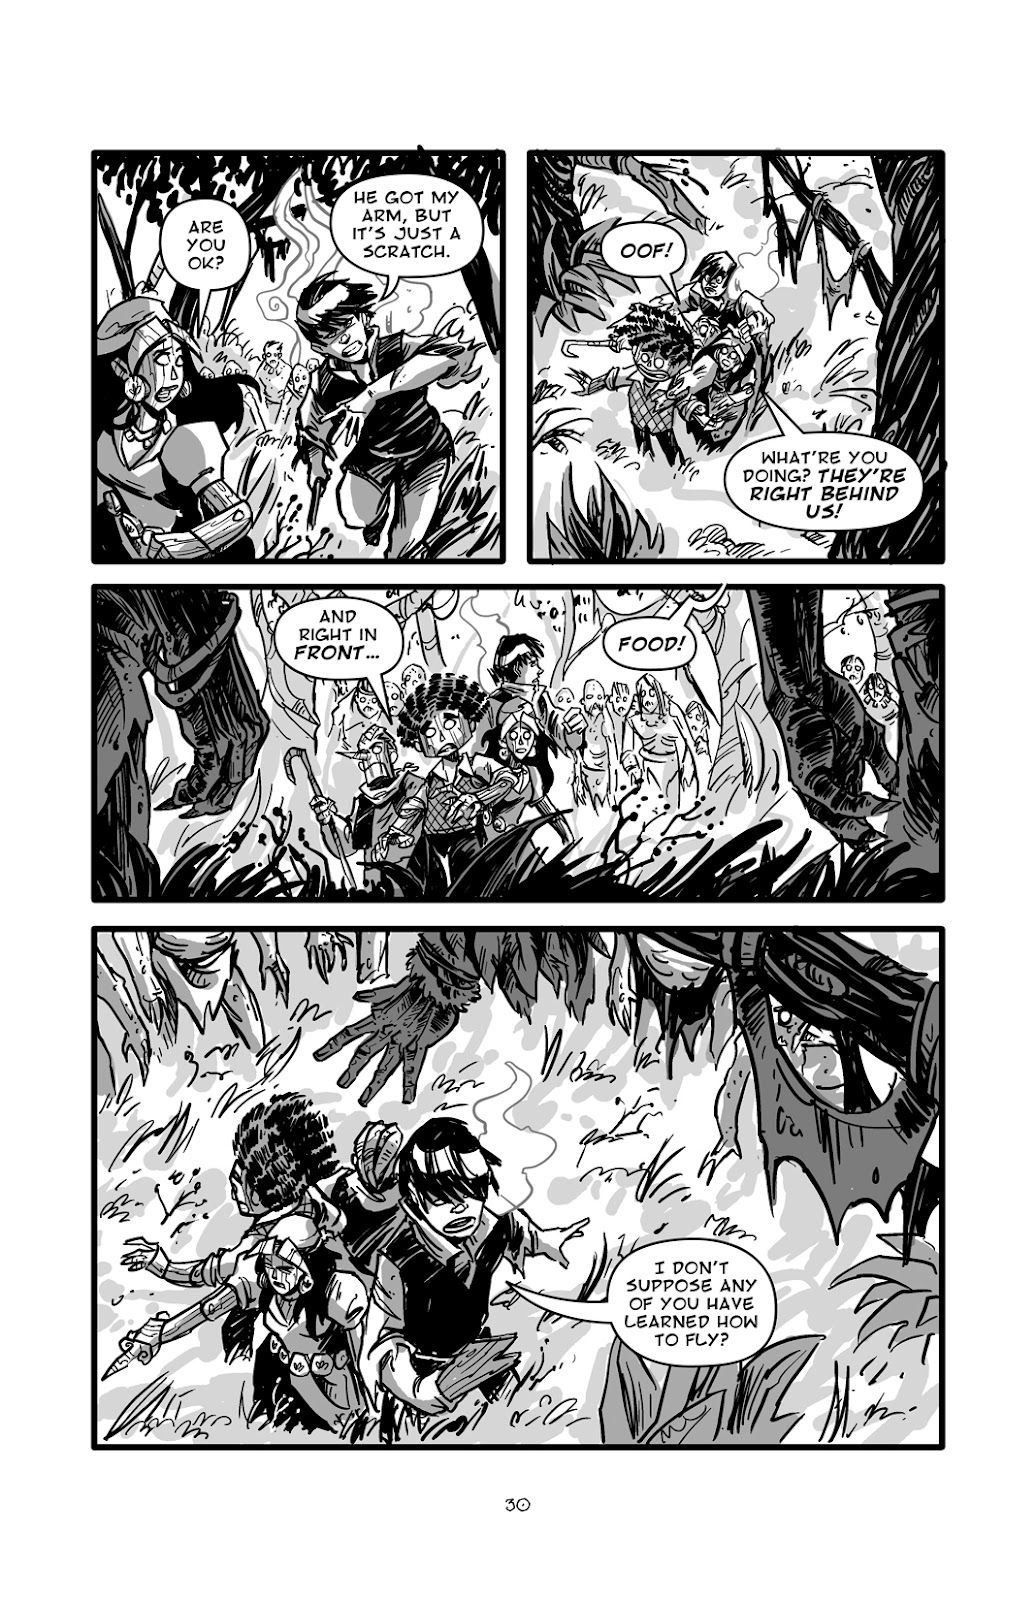 Pinocchio: Vampire Slayer - Of Wood and Blood issue 2 - Page 5